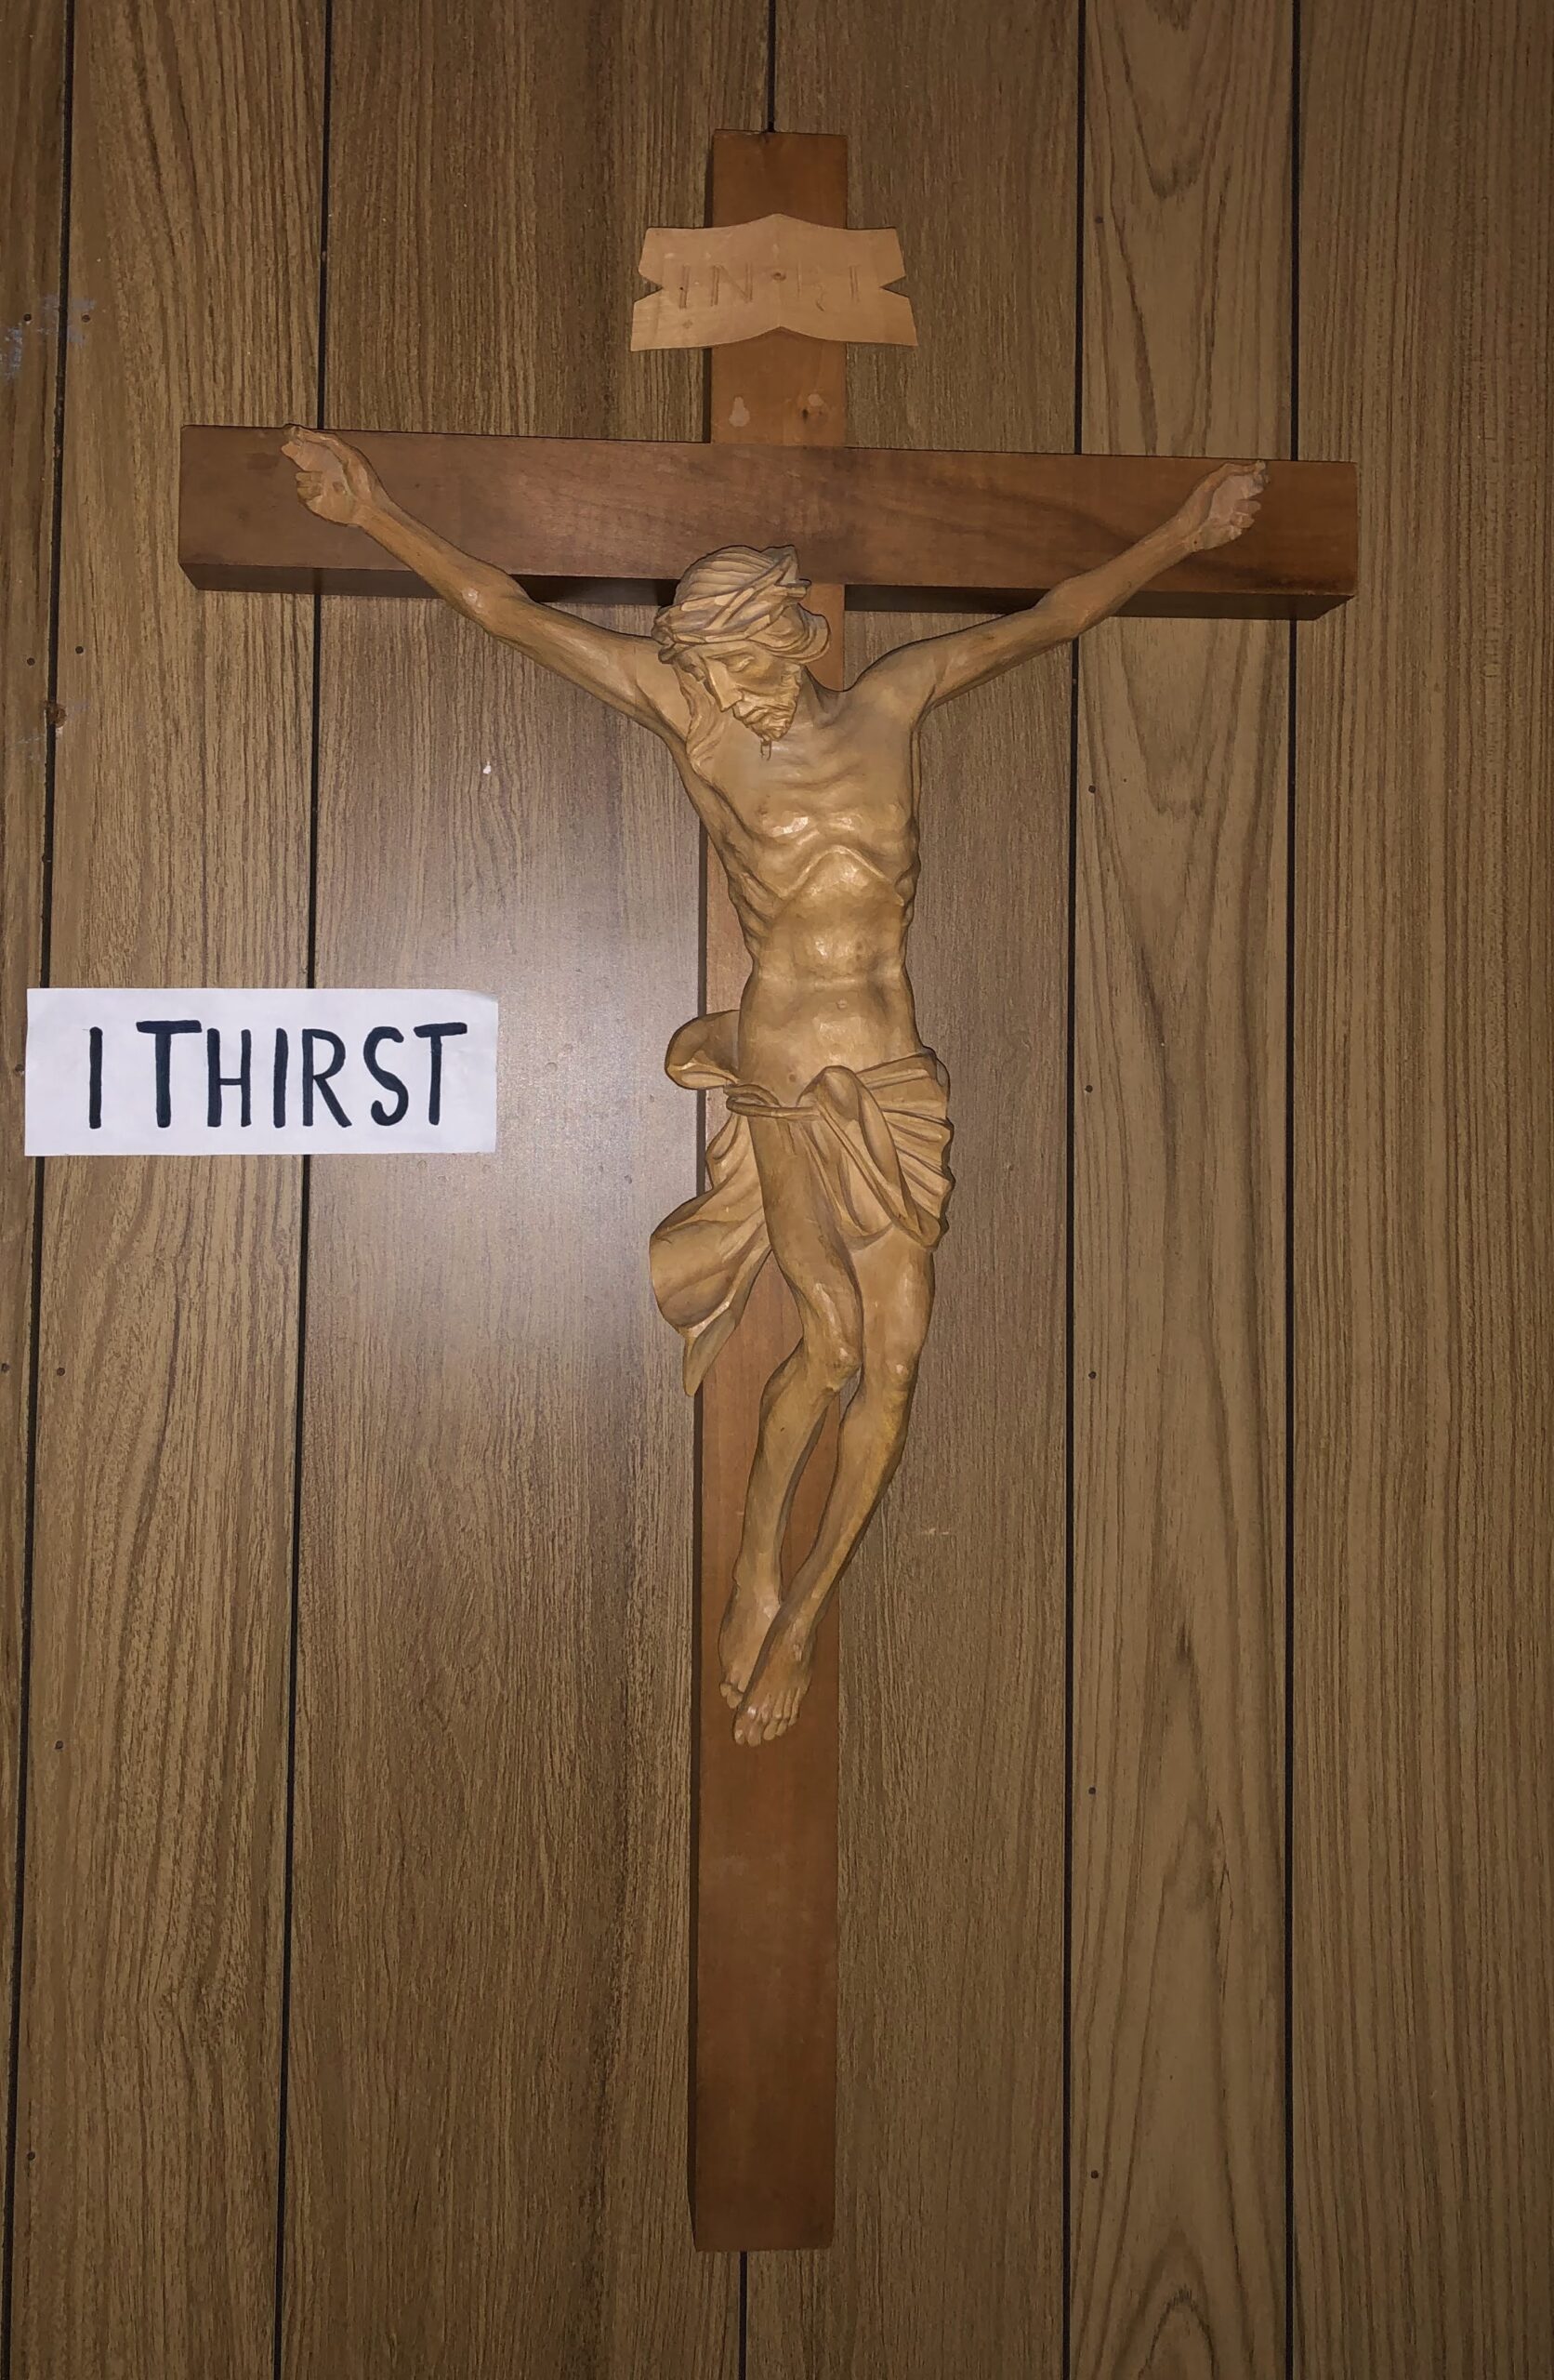 Jesus on the Cross thirsts for souls